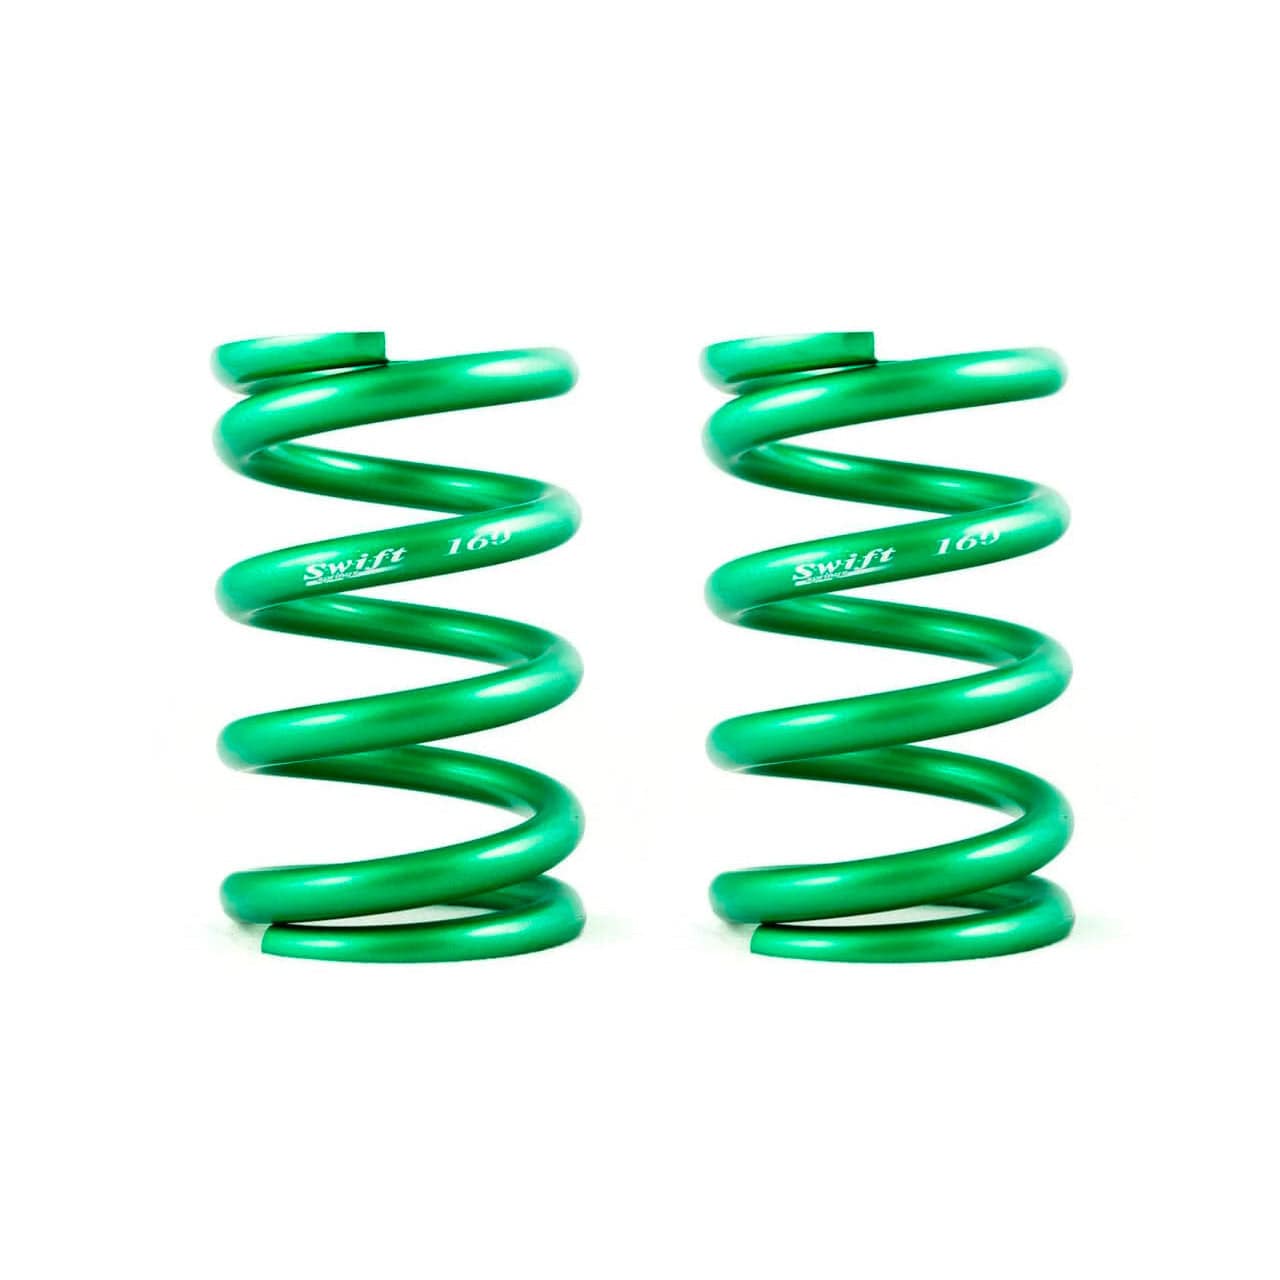 Swift Springs Metric Coilover Springs - ID 70mm, 10" Length